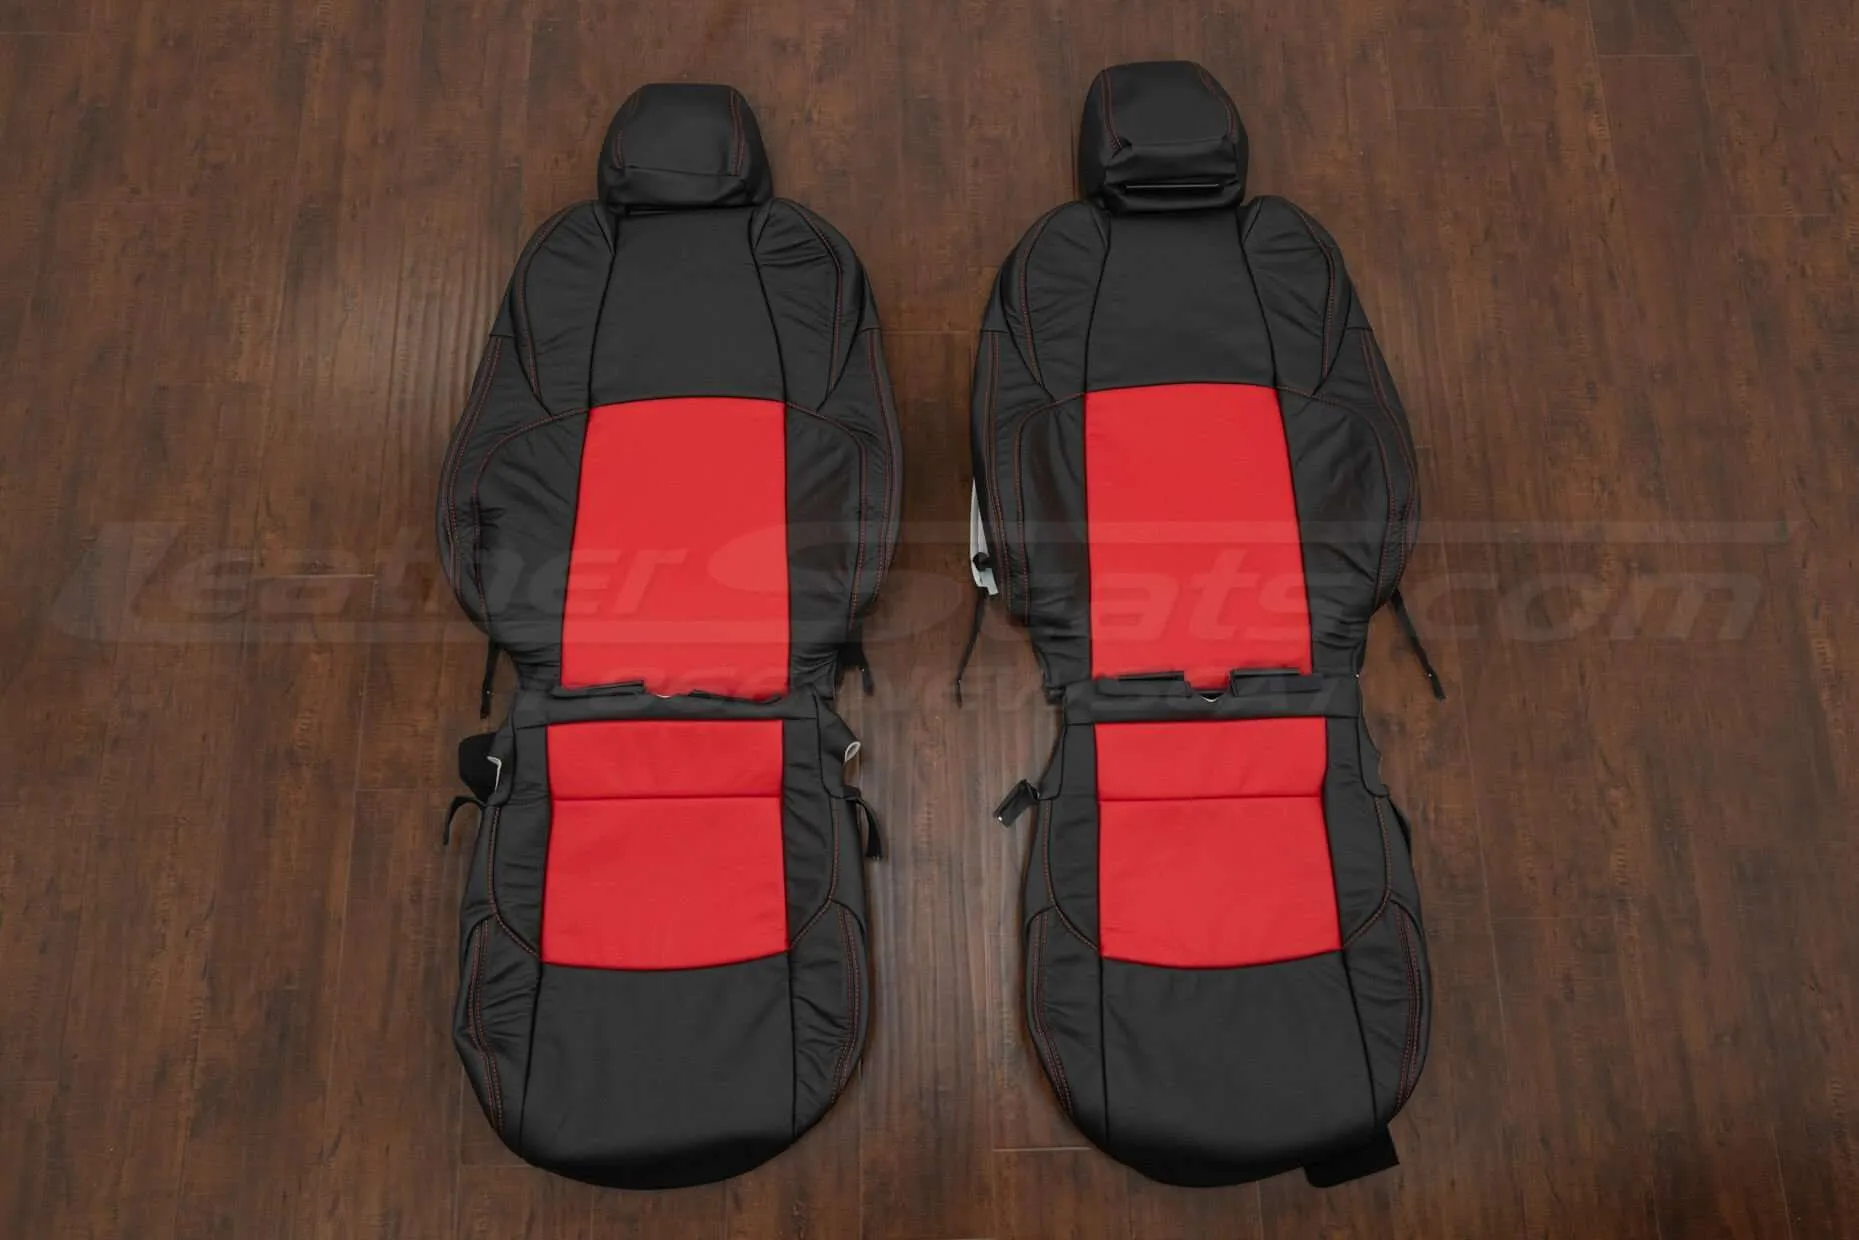 2018-2022 Toyota C-HR Leather Seat Upholstery Kit - Black/Bright Red Inserts - Front seat upholstery